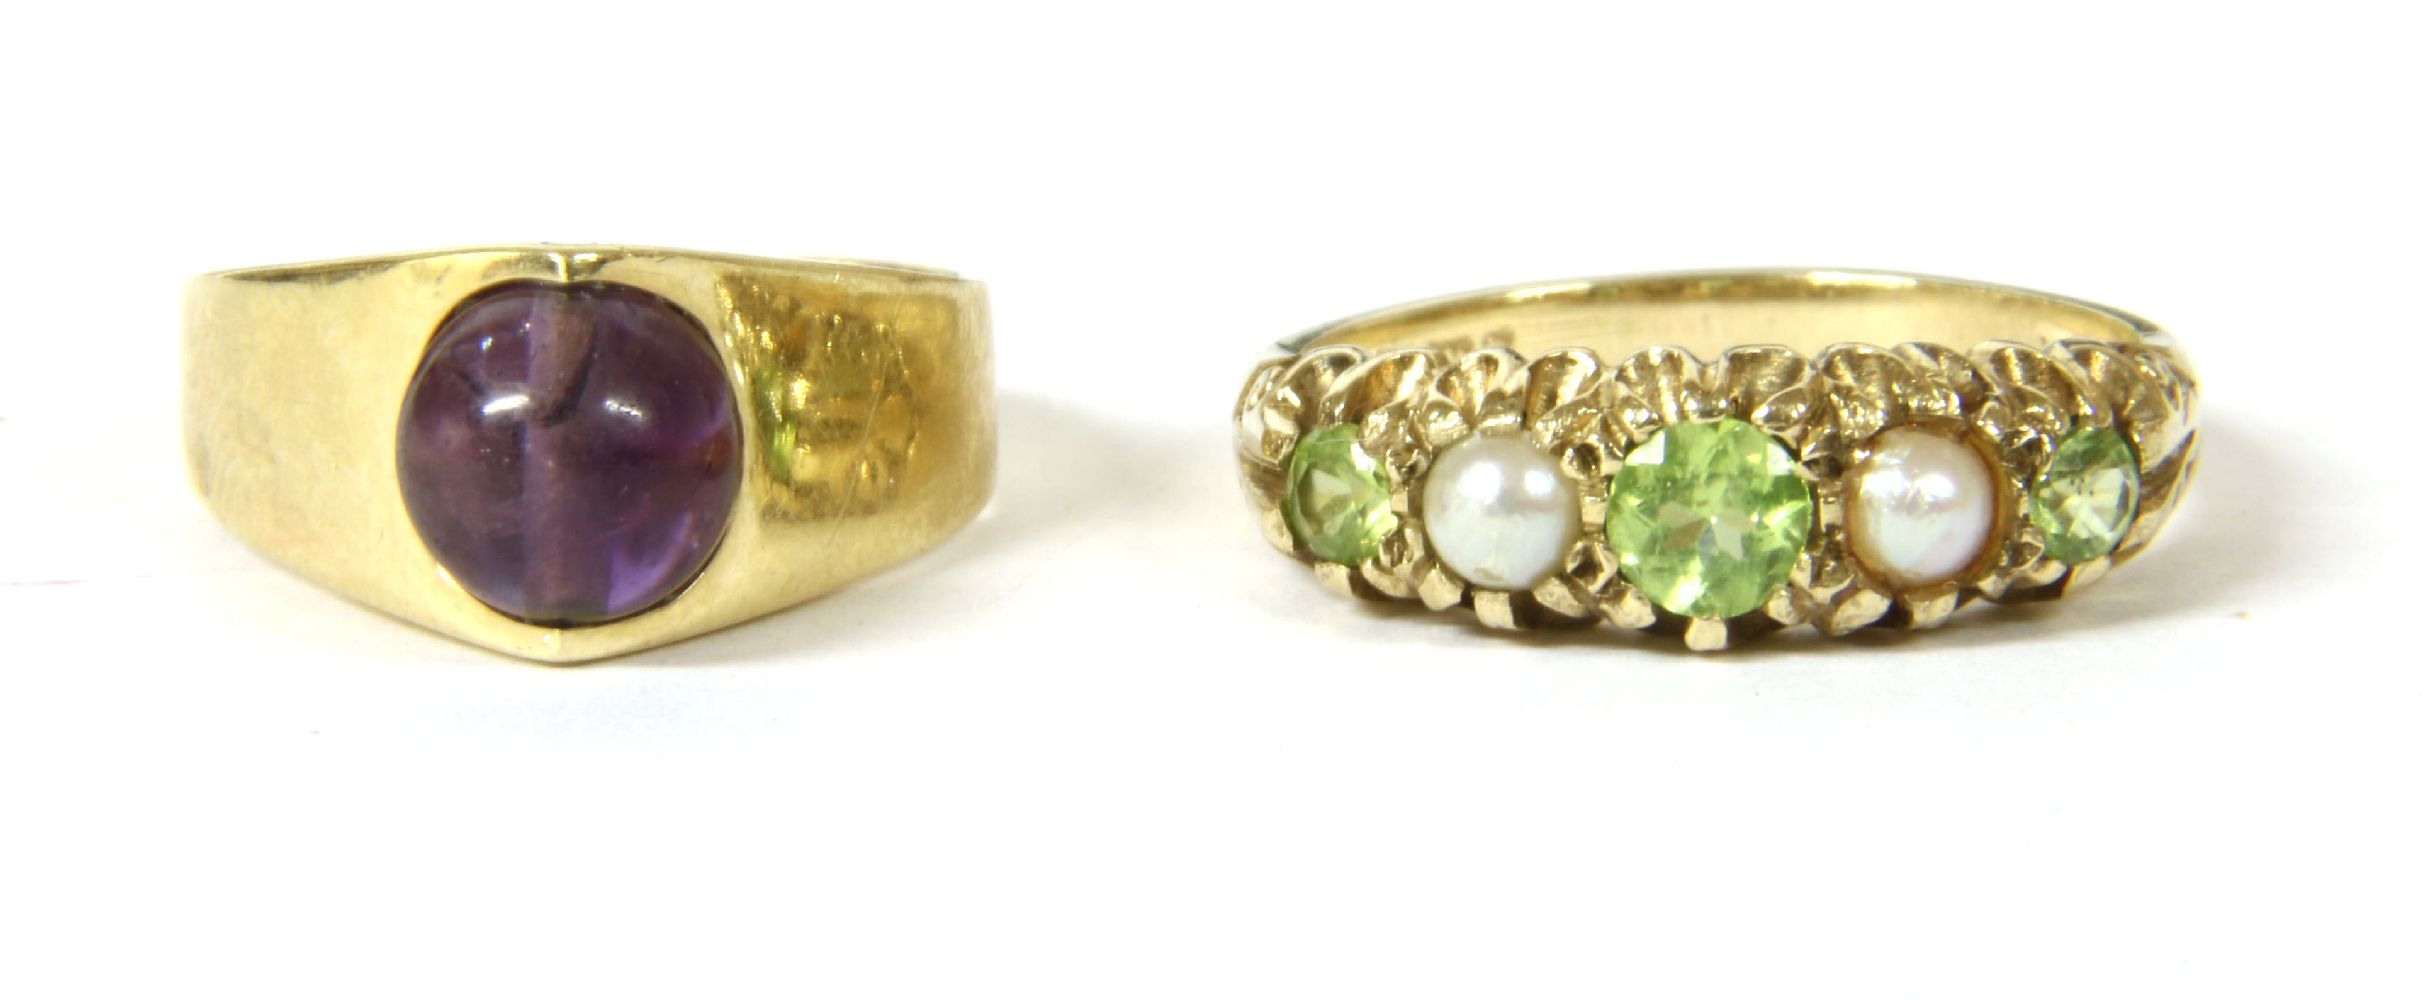 A French gold single stone amethyst bead ring, marked 585, size H, 3.40g, and a 9ct gold peridot and